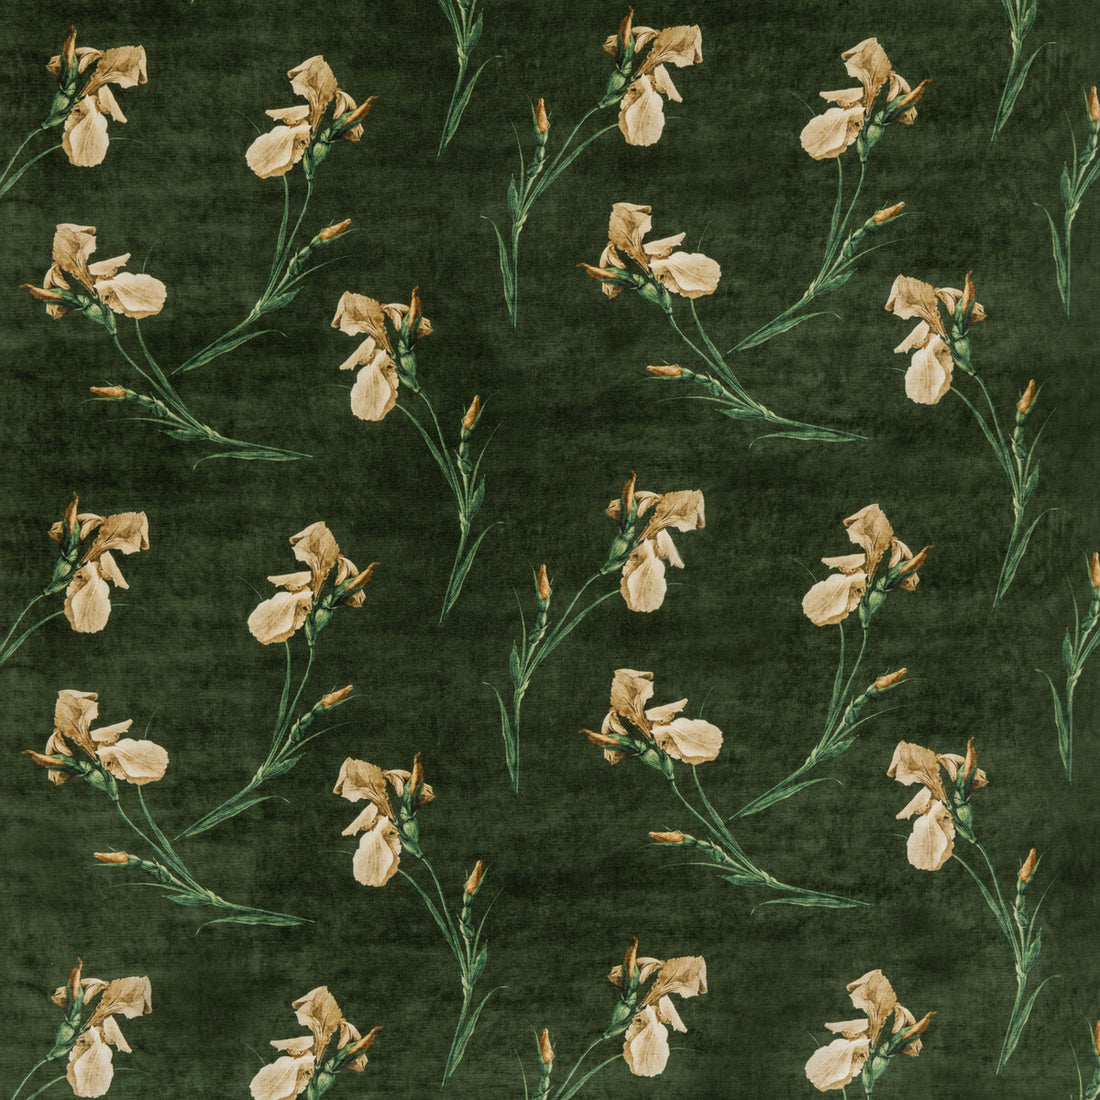 Baker Iris fabric in emerald color - pattern BP10819.2.0 - by G P &amp; J Baker in the Signature Velvets collection